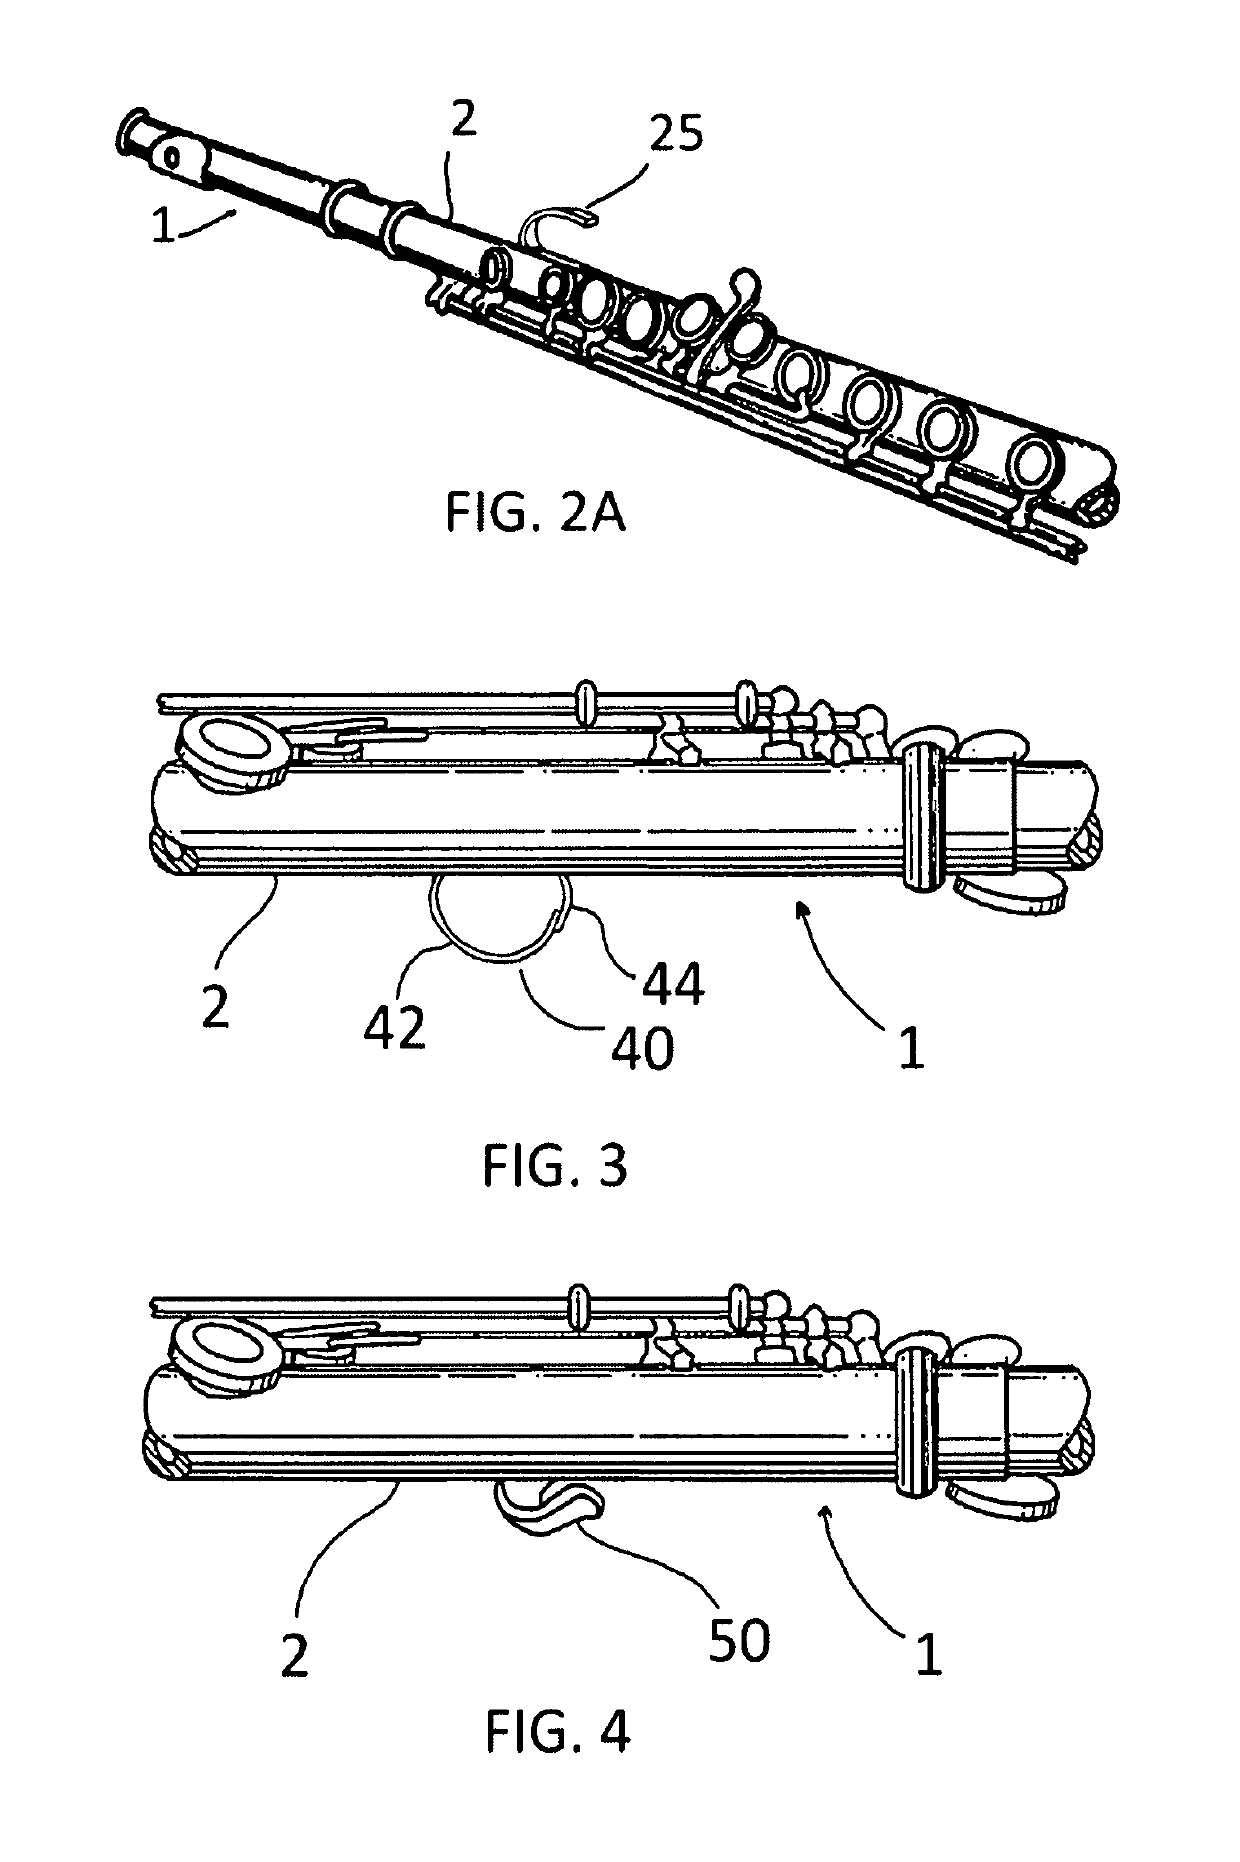 Flute with enhanced flute-finger connection